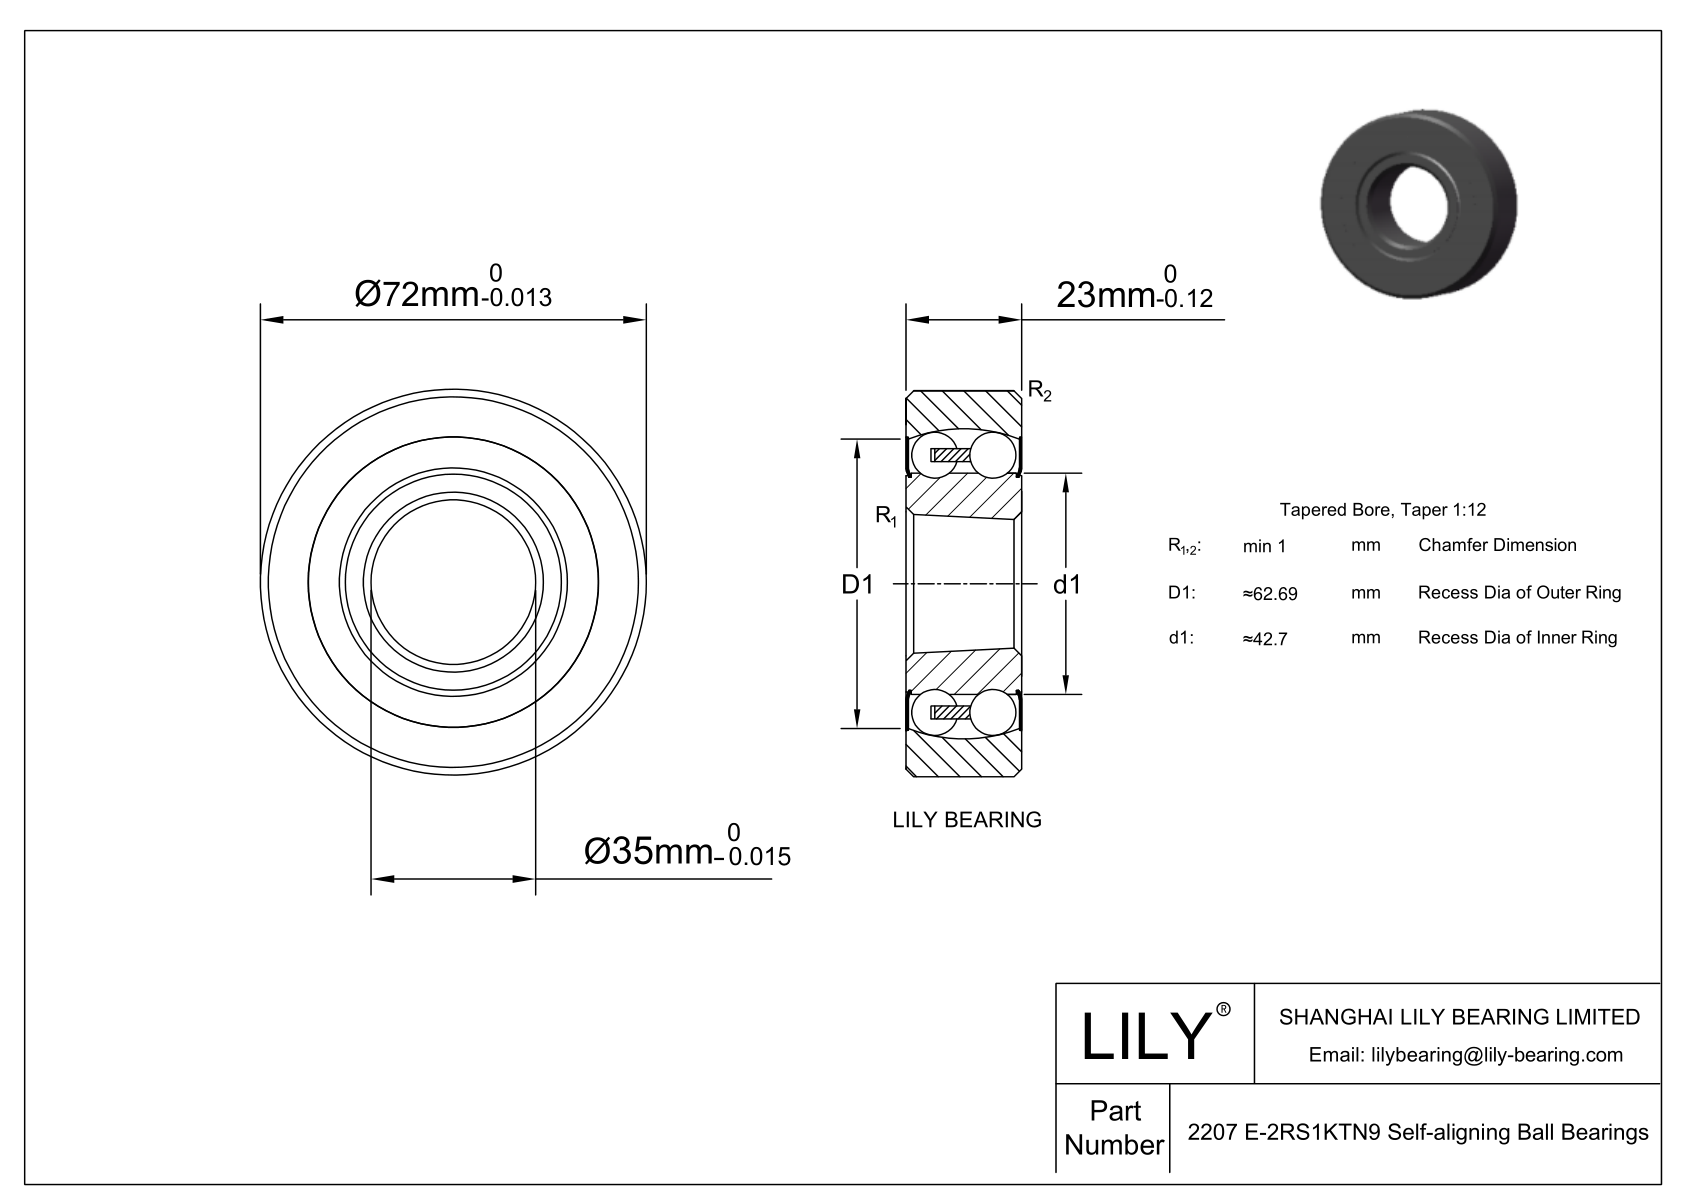 CE2207 E-SCPP Silicon Carbide Self Aligning Ball Bearings cad drawing